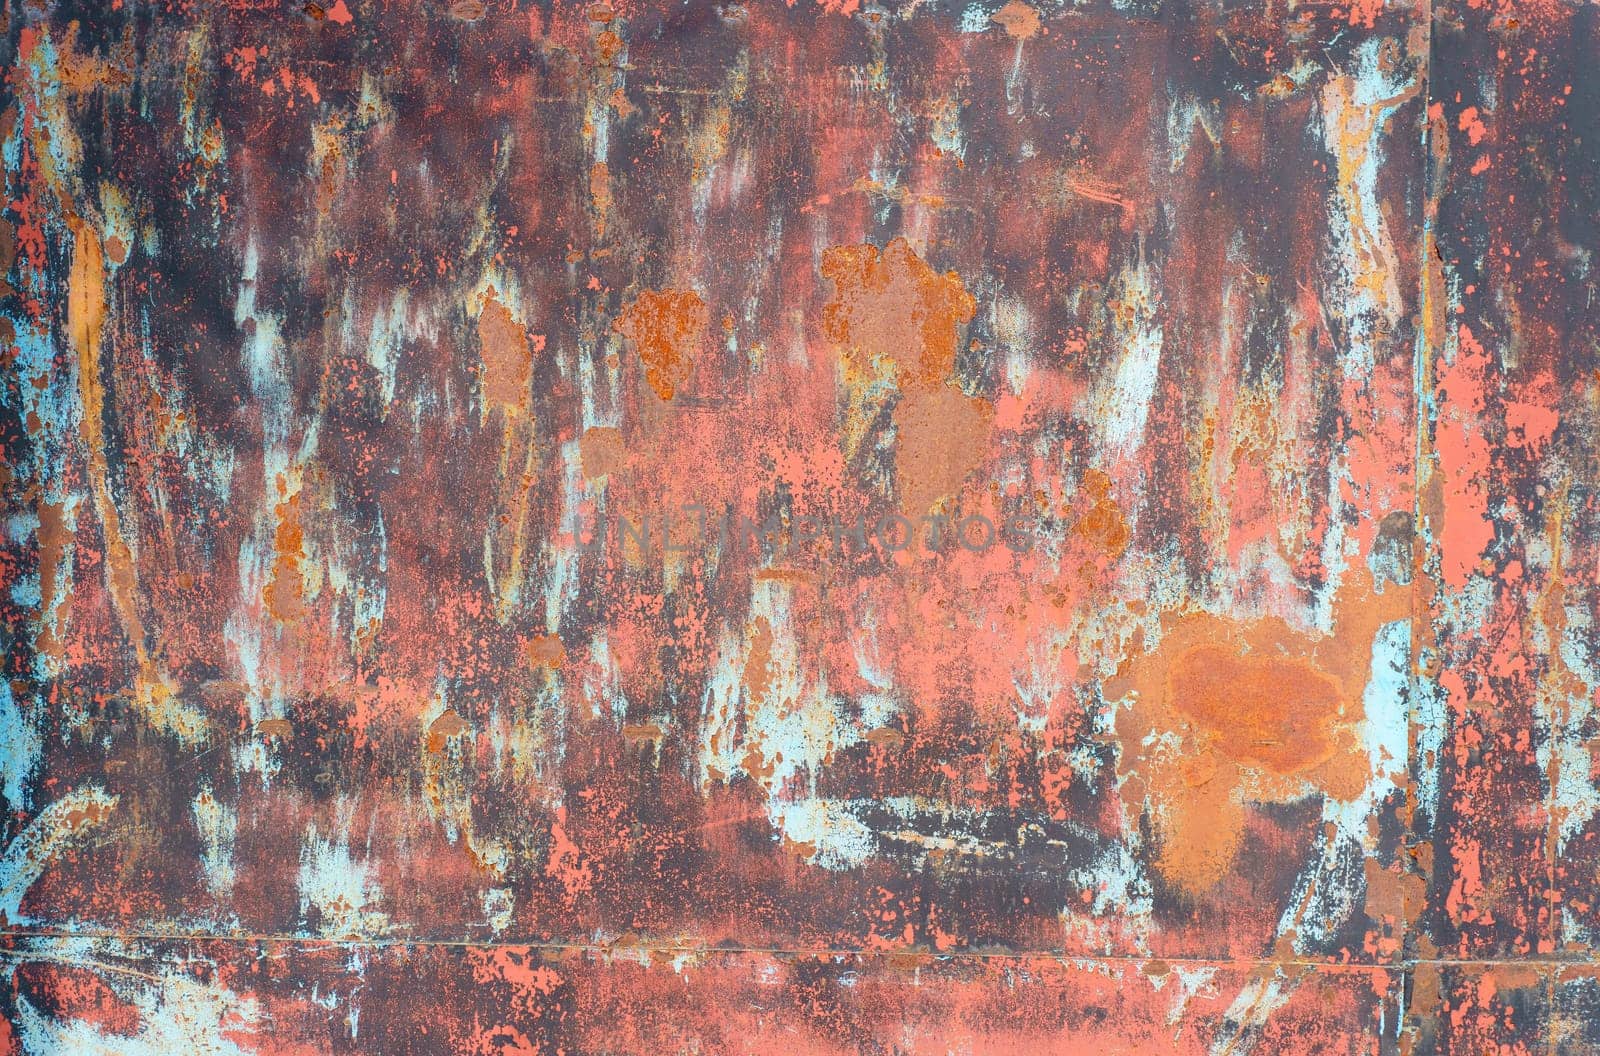 Texture of an old rusty metal sheet with red and gray paint elements. close-up.